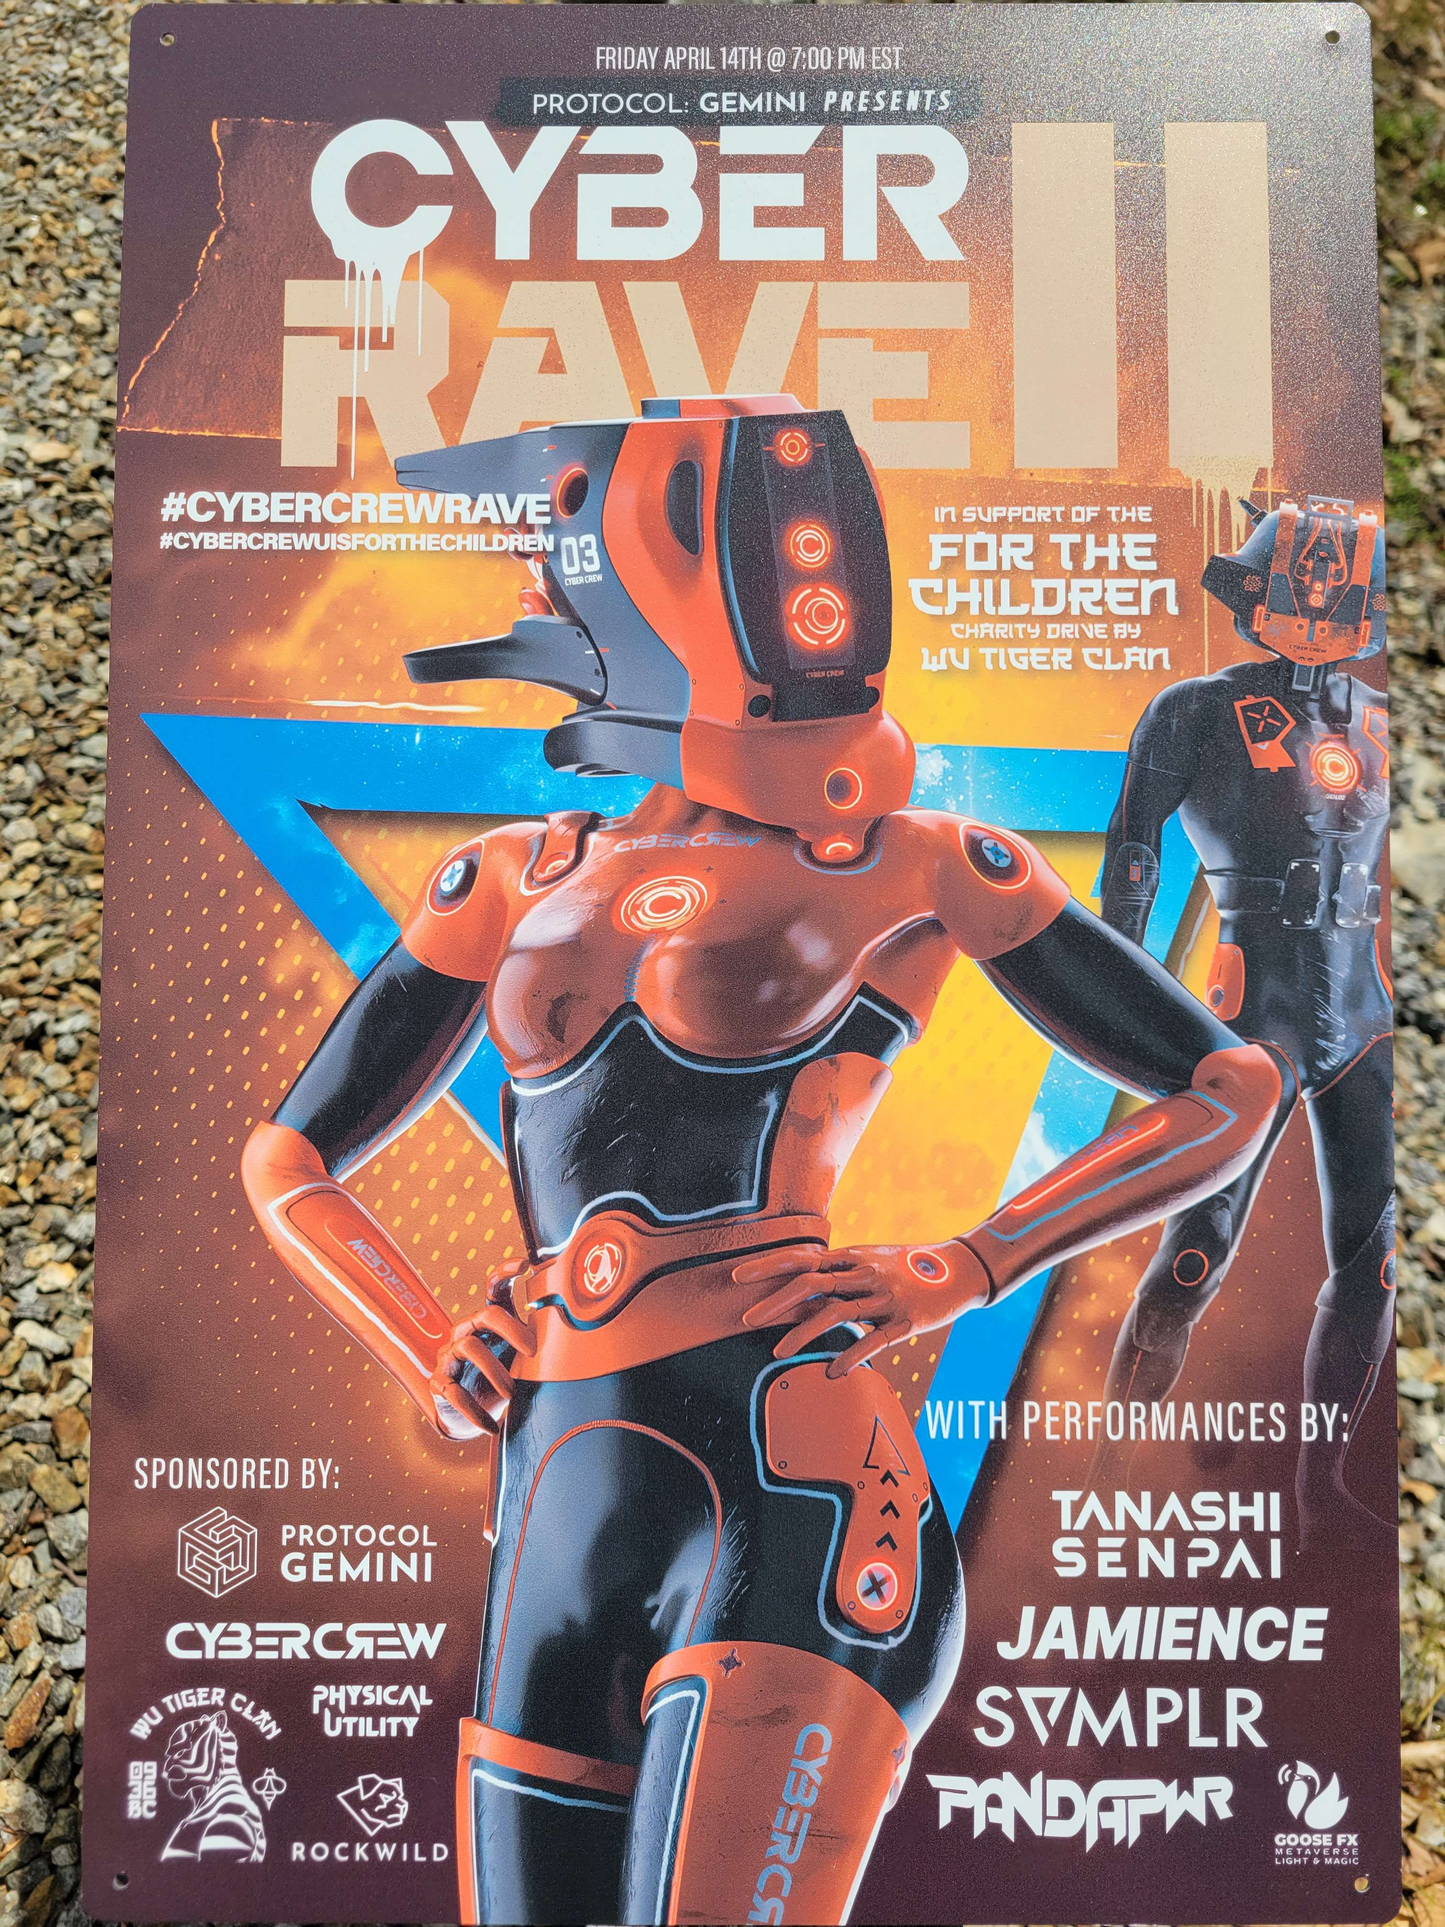 CC Rave Flyer - METAL POSTER (For The Children)